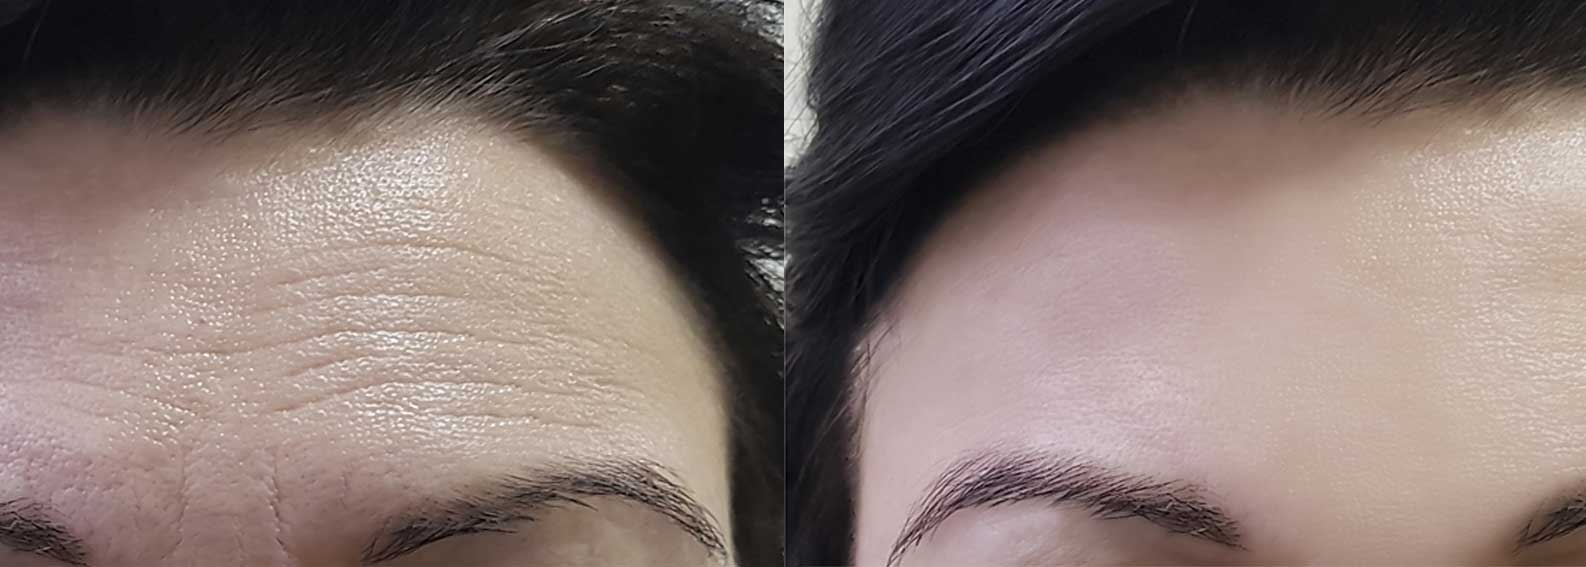 Woman's forehead with wrinkles before Botox and none after Botox